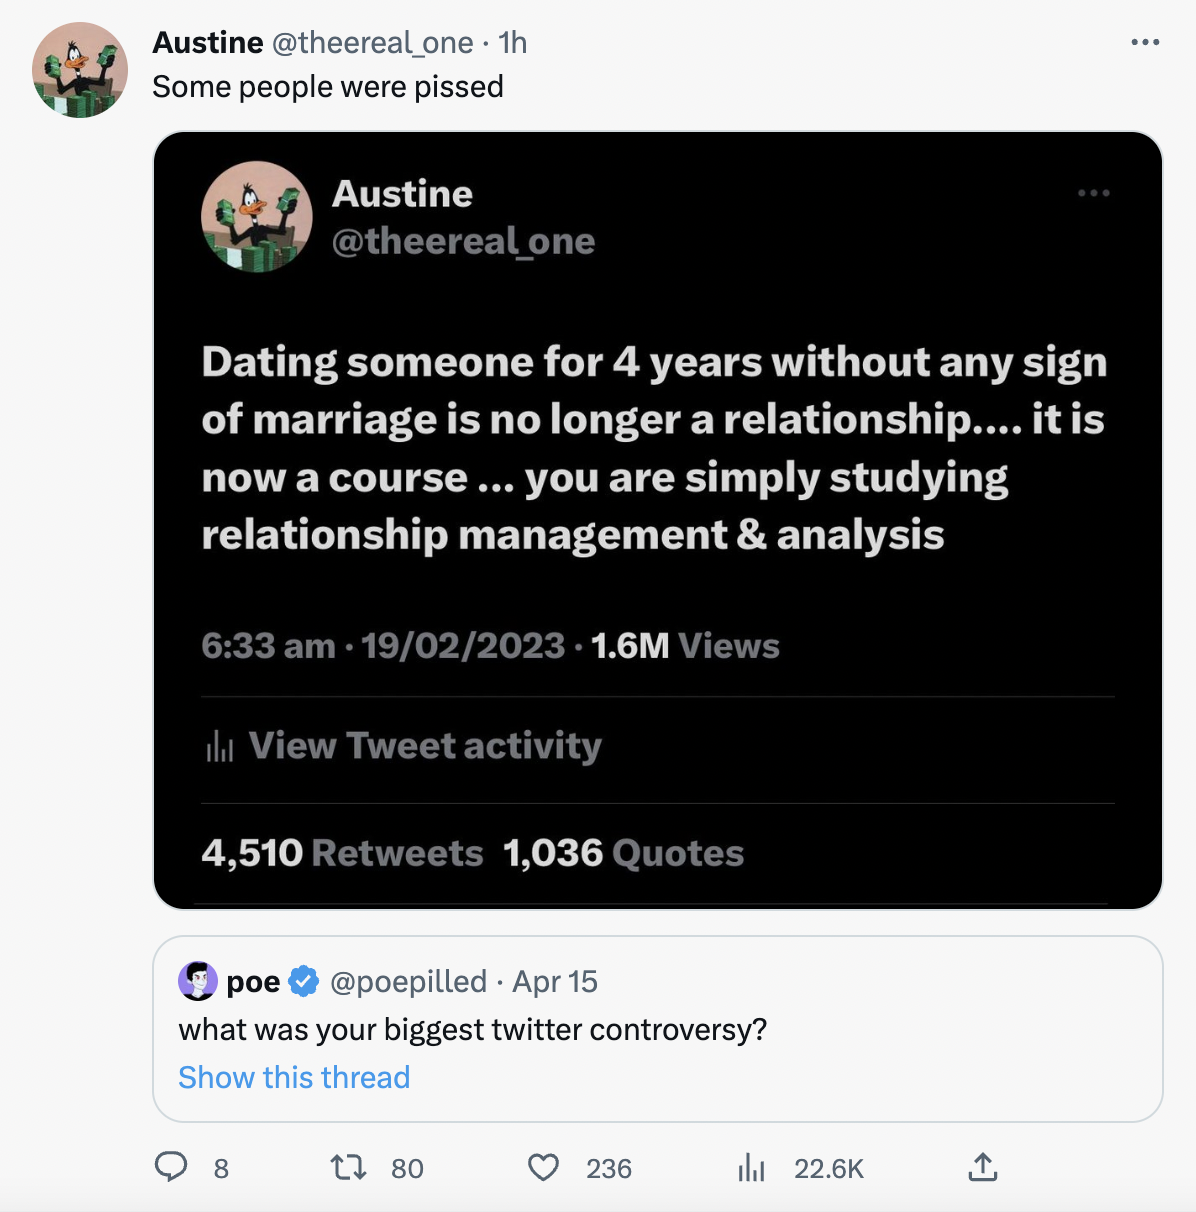 controversial tweets - multimedia - Austine .  Some people were pissed Austine Dating someone for 4 years without any sign of marriage is no longer a relationship.... it is now a course ... you are simply studying relationship management & analysis